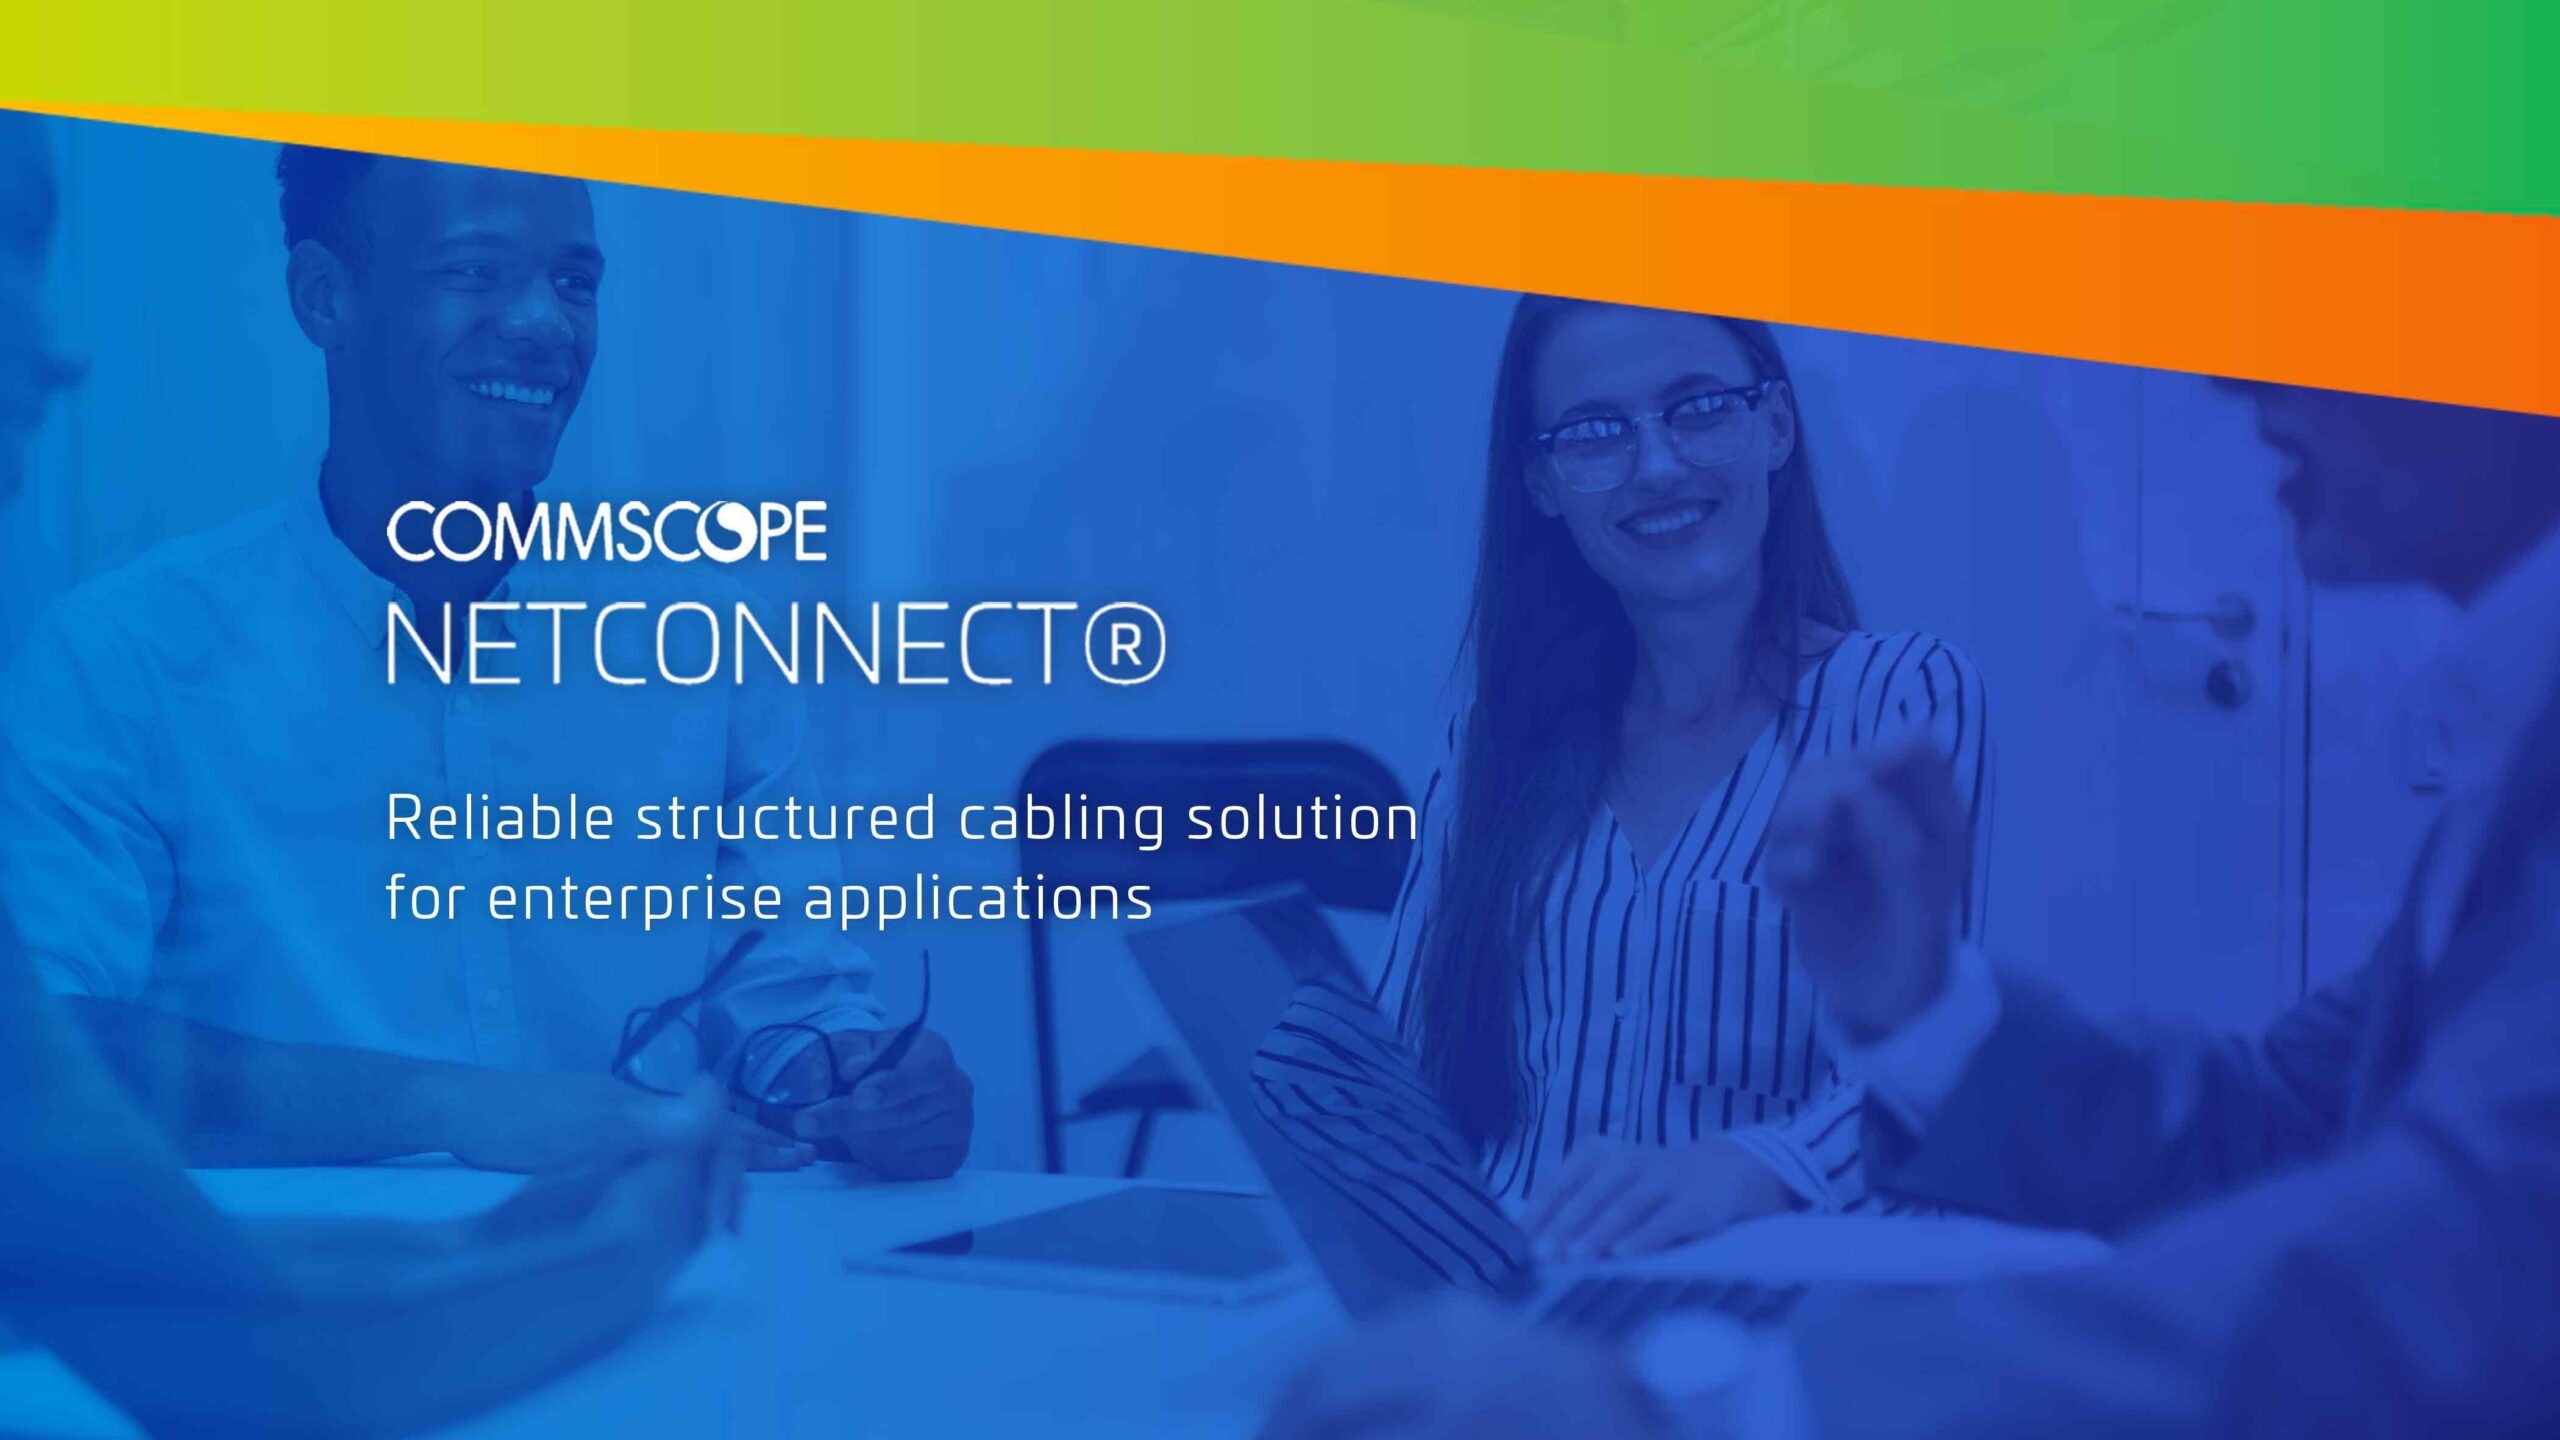 FEATURED-IMAGE CommScope NETCONNECT